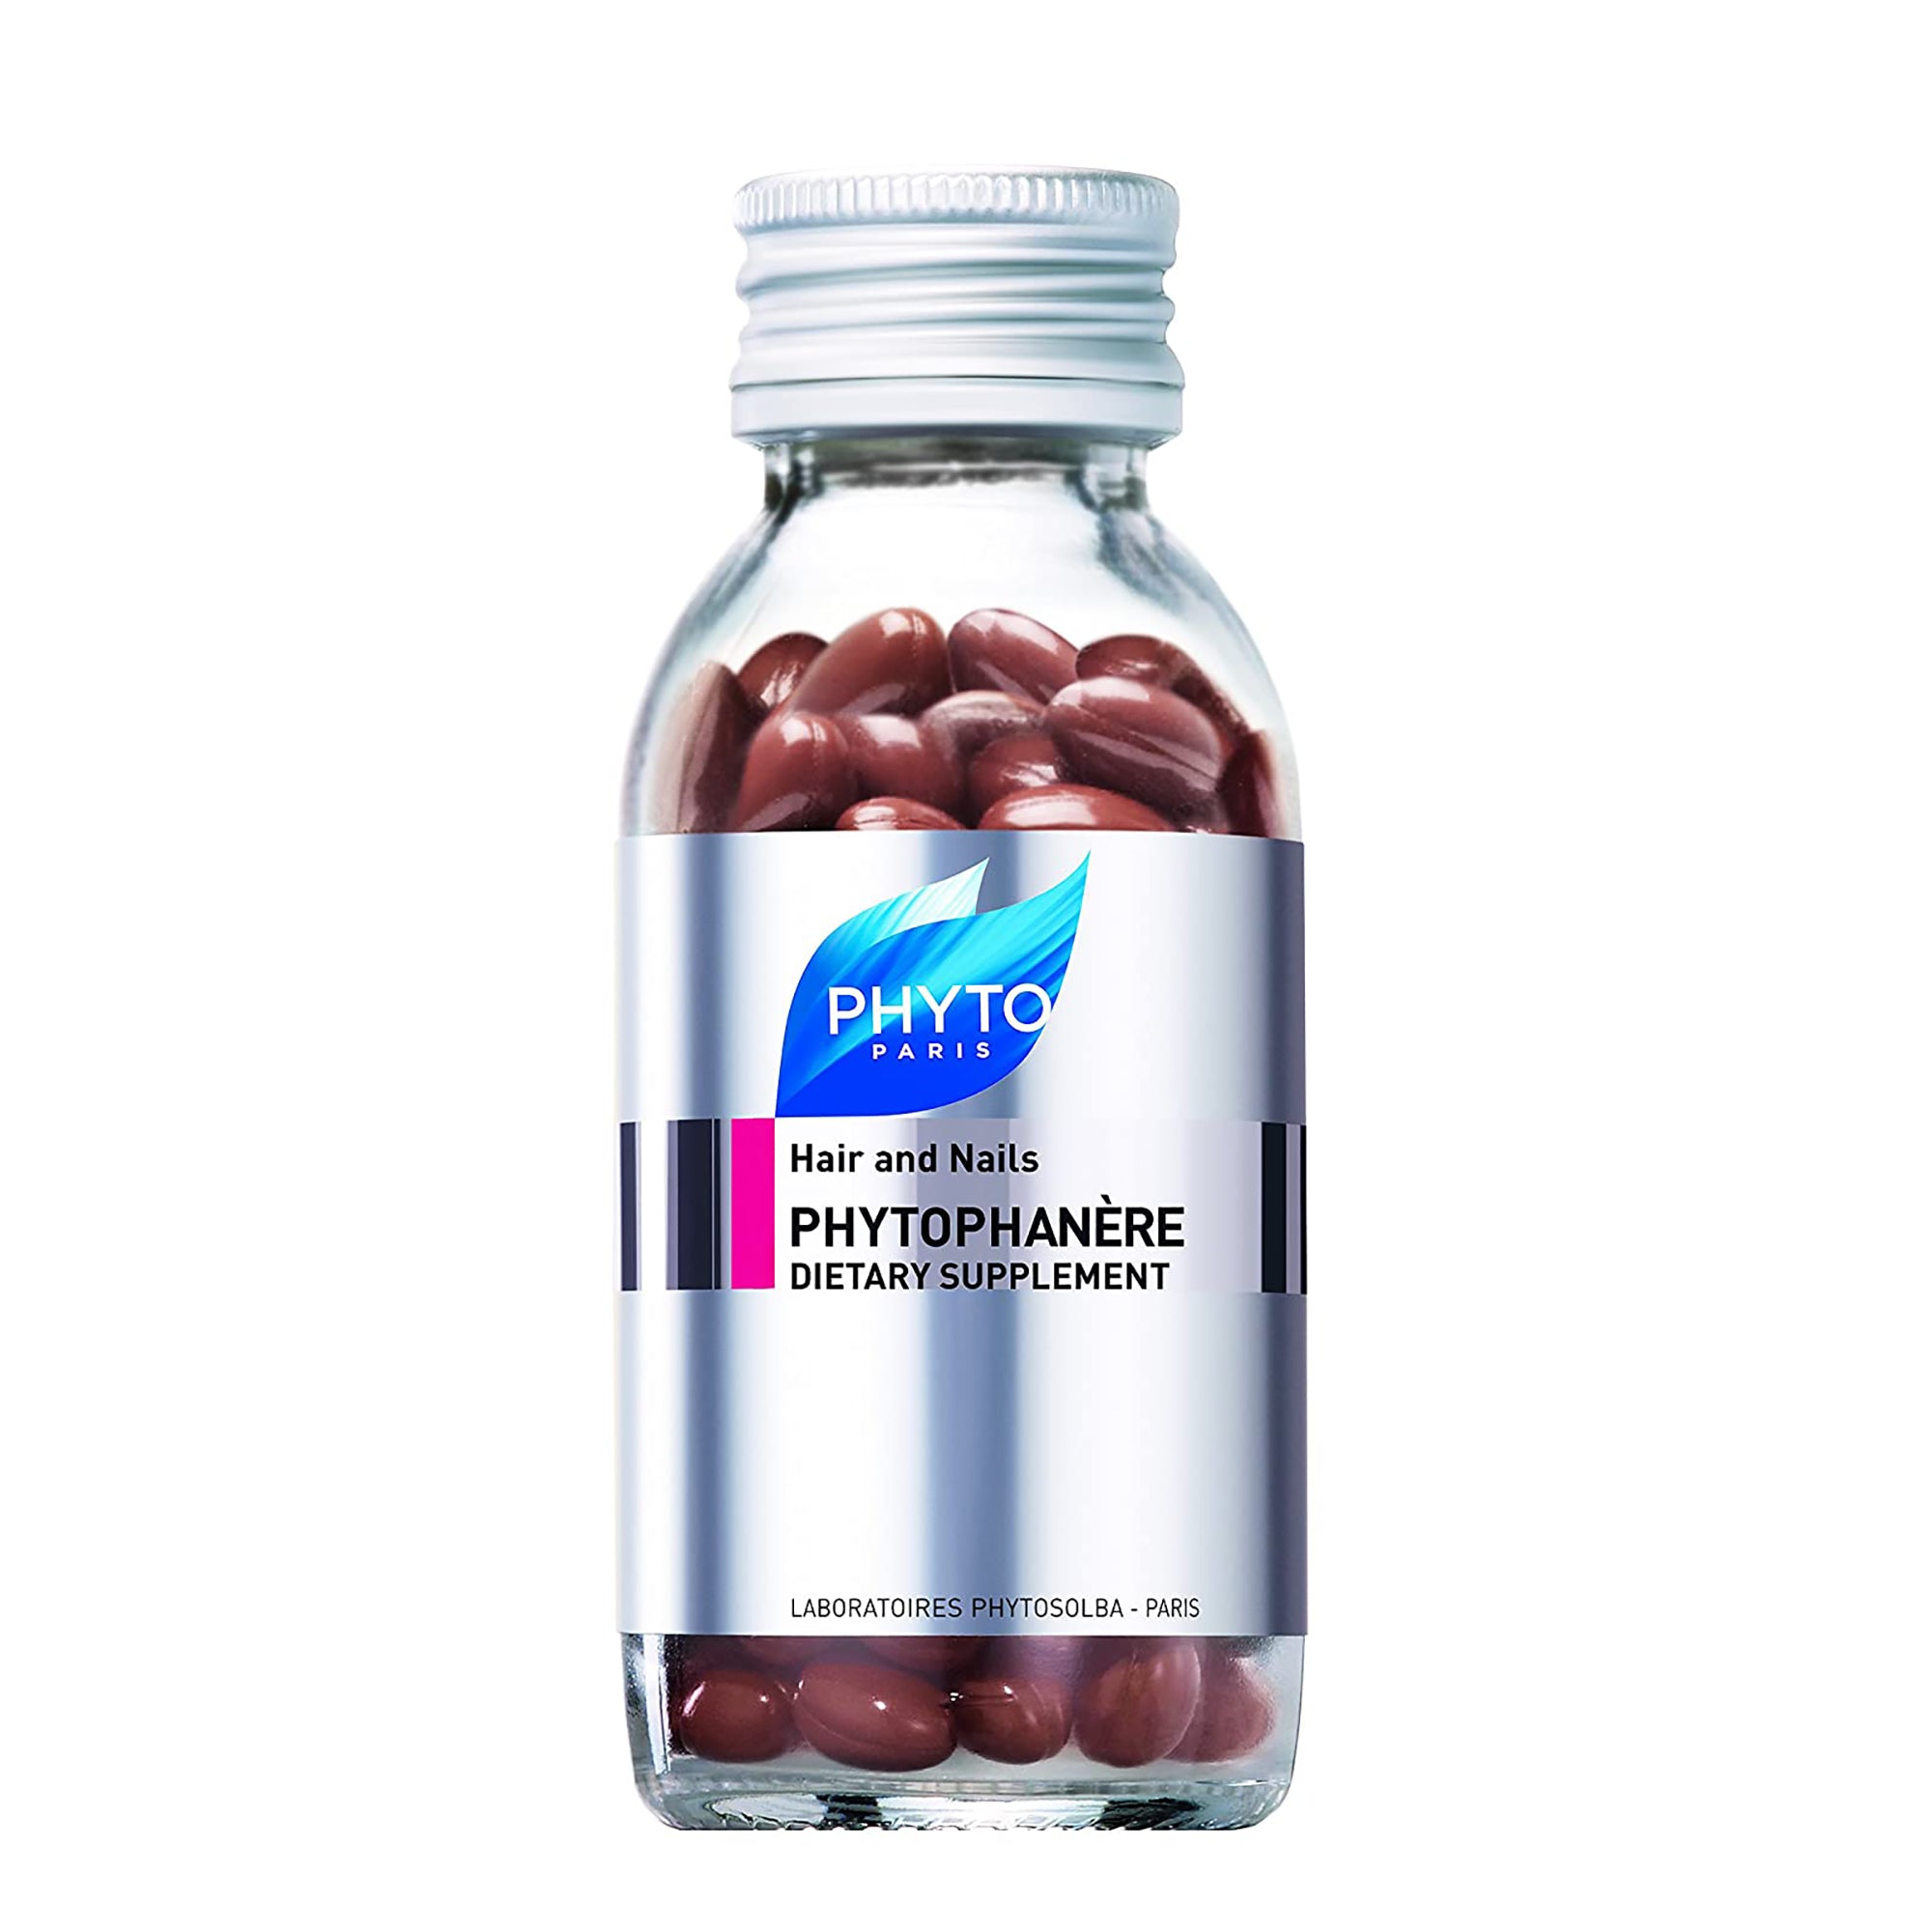 Phyto Phytophanere Dietary Supplement - Two Month Supply / 120